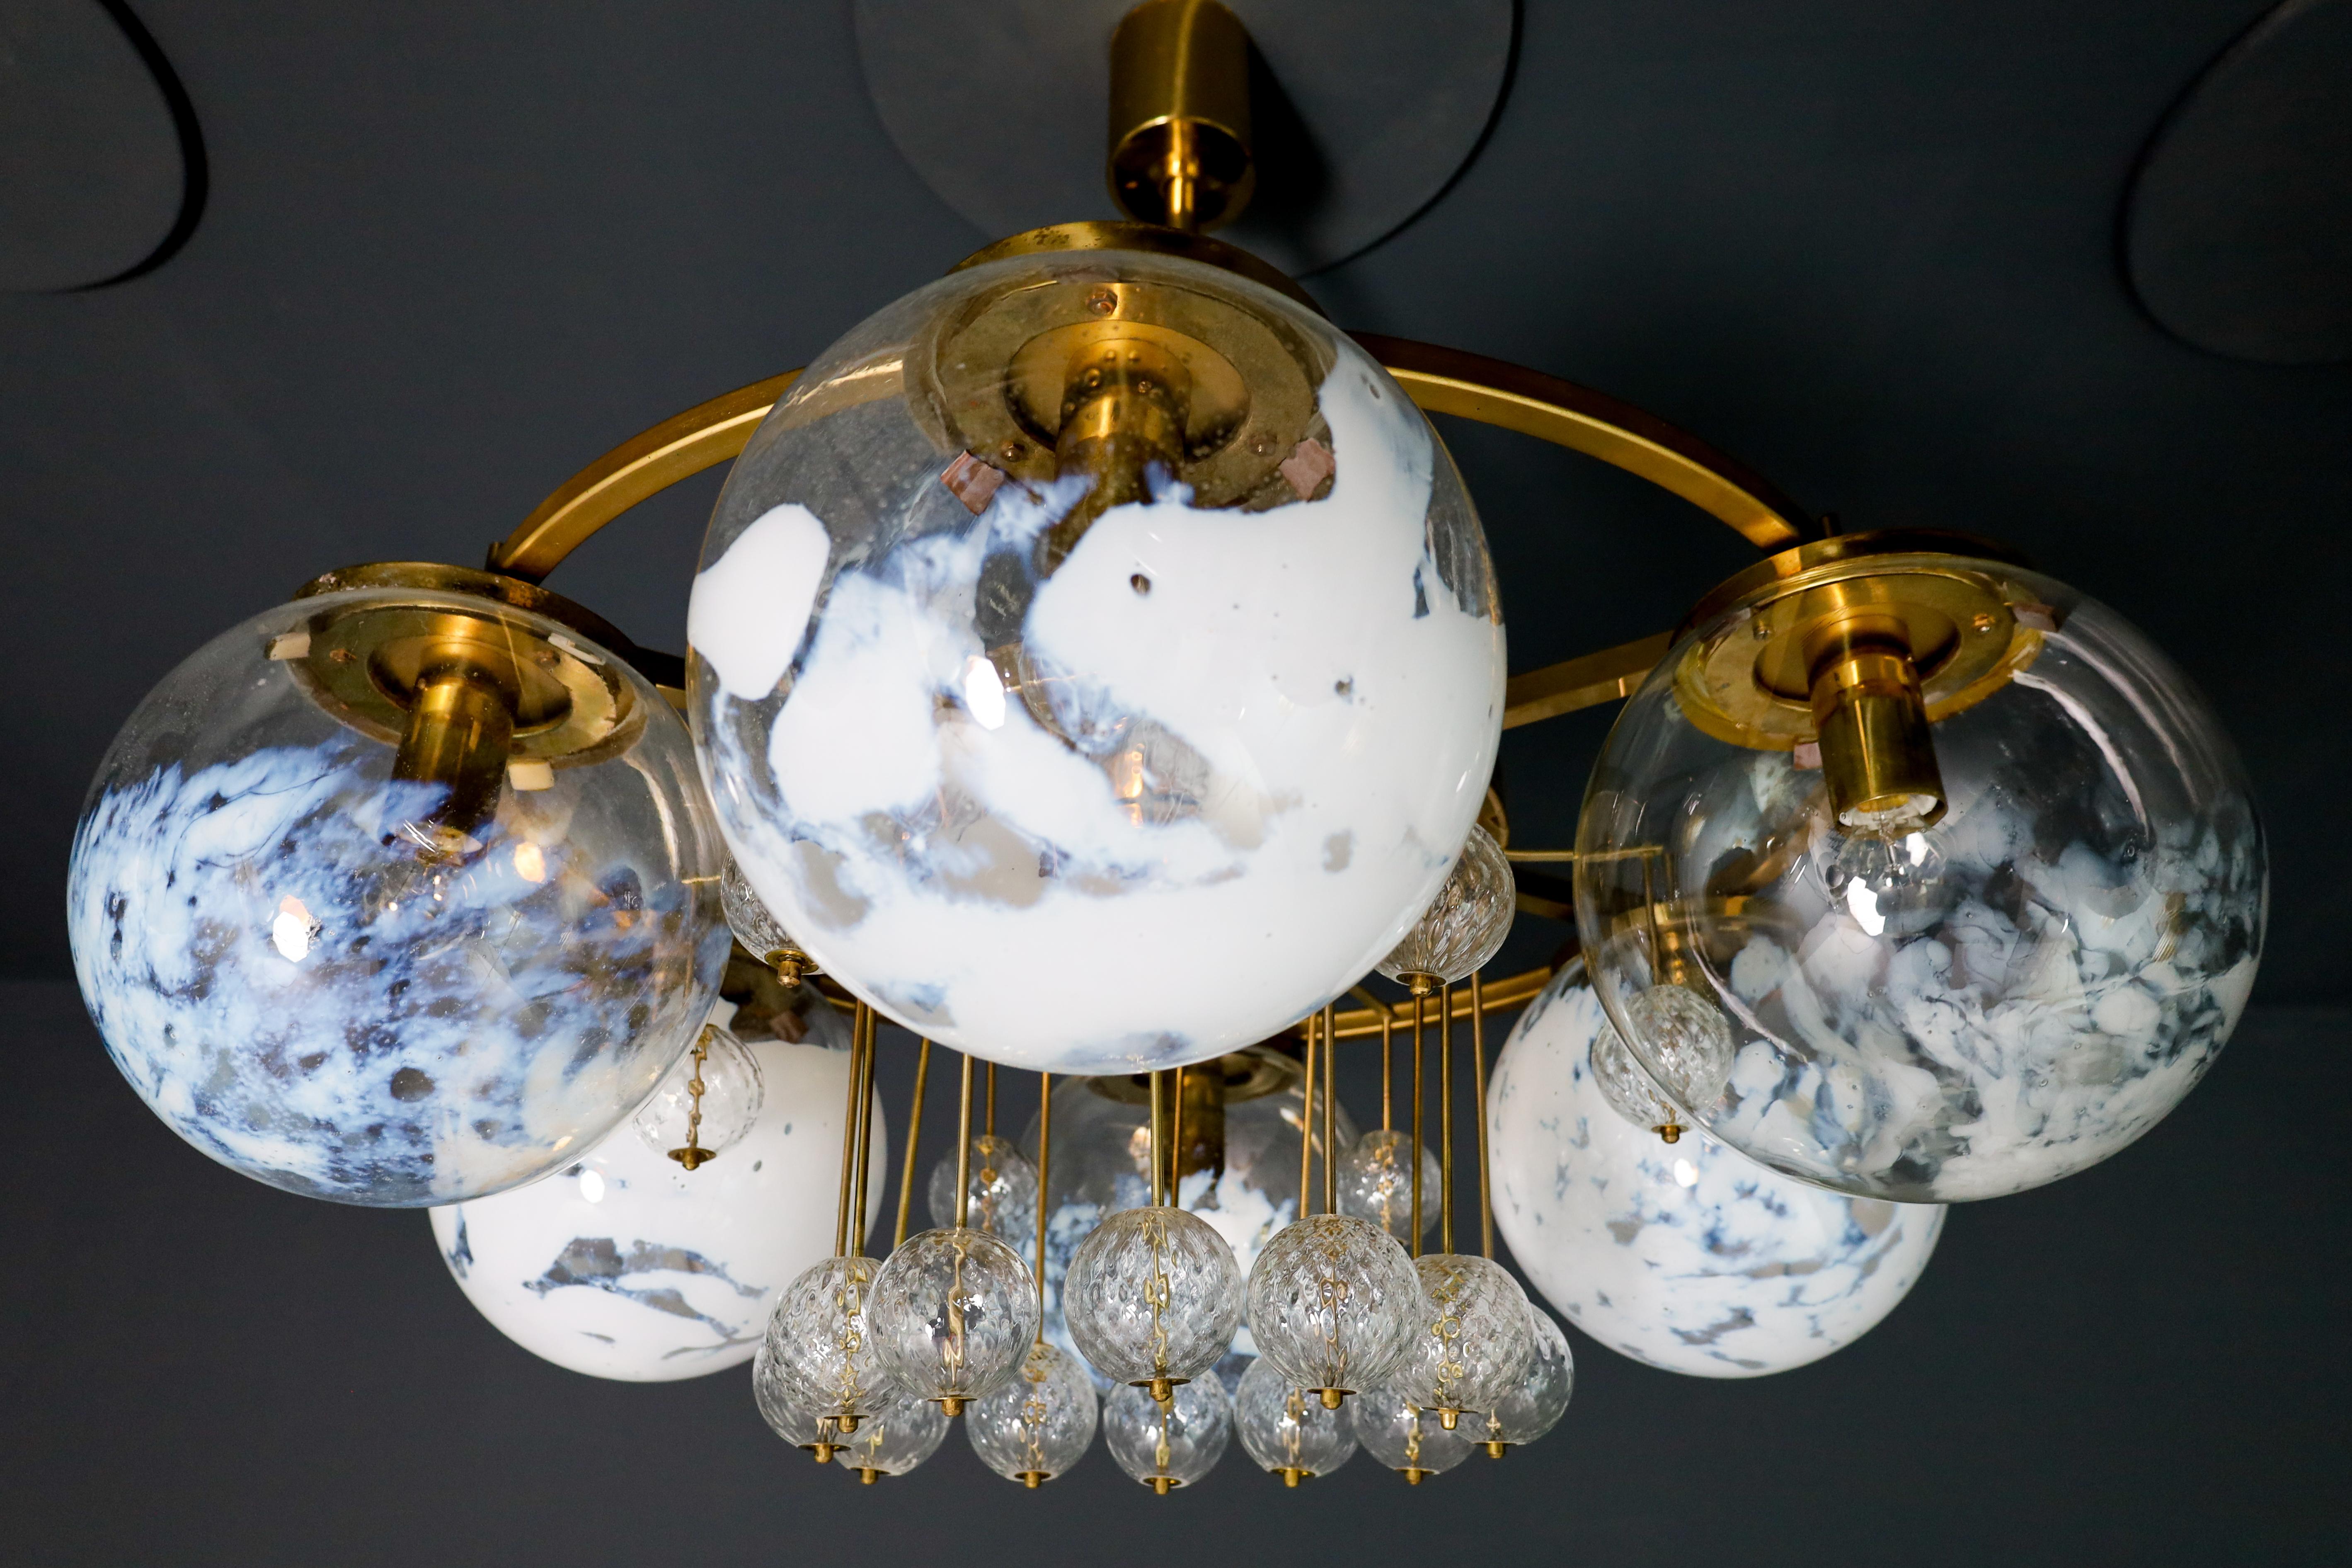 Large Hotel Chandelier in Brass and Hand Blown Glass 1950s

A grand Chandelier with brass fixture produced and designed in Czechia Bohemian in the 1960s. There are six large mouthblown,  Art-glass globes and 18 smaller structured globes. The